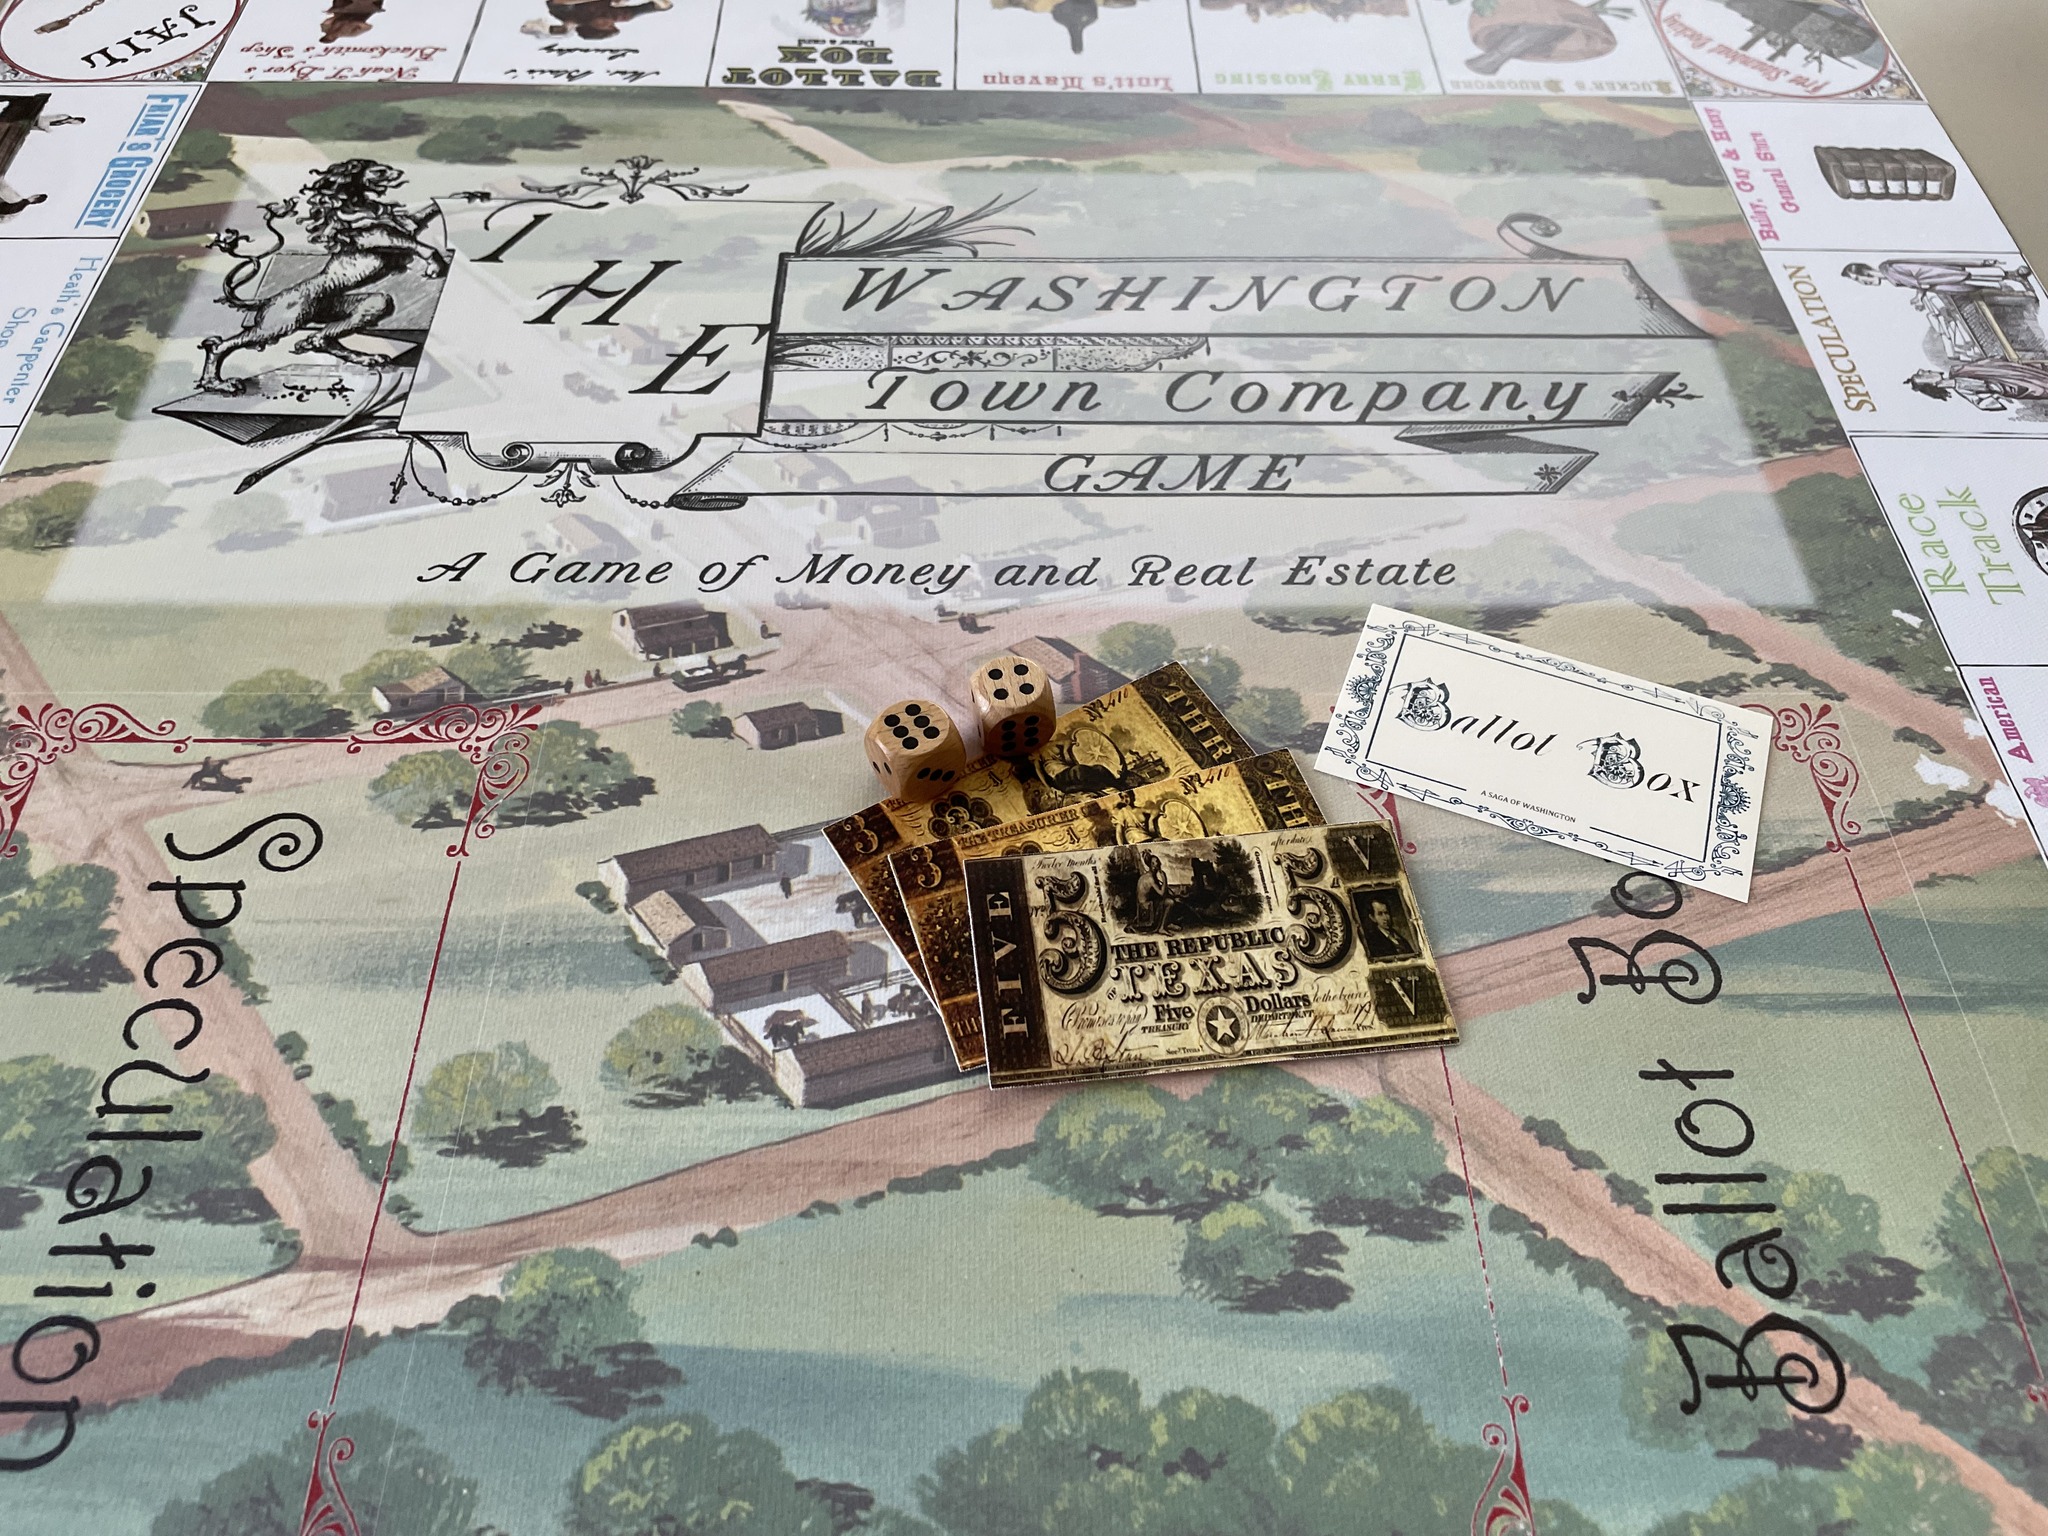 Game Board for Town Company: A Game of Money and Real Estate